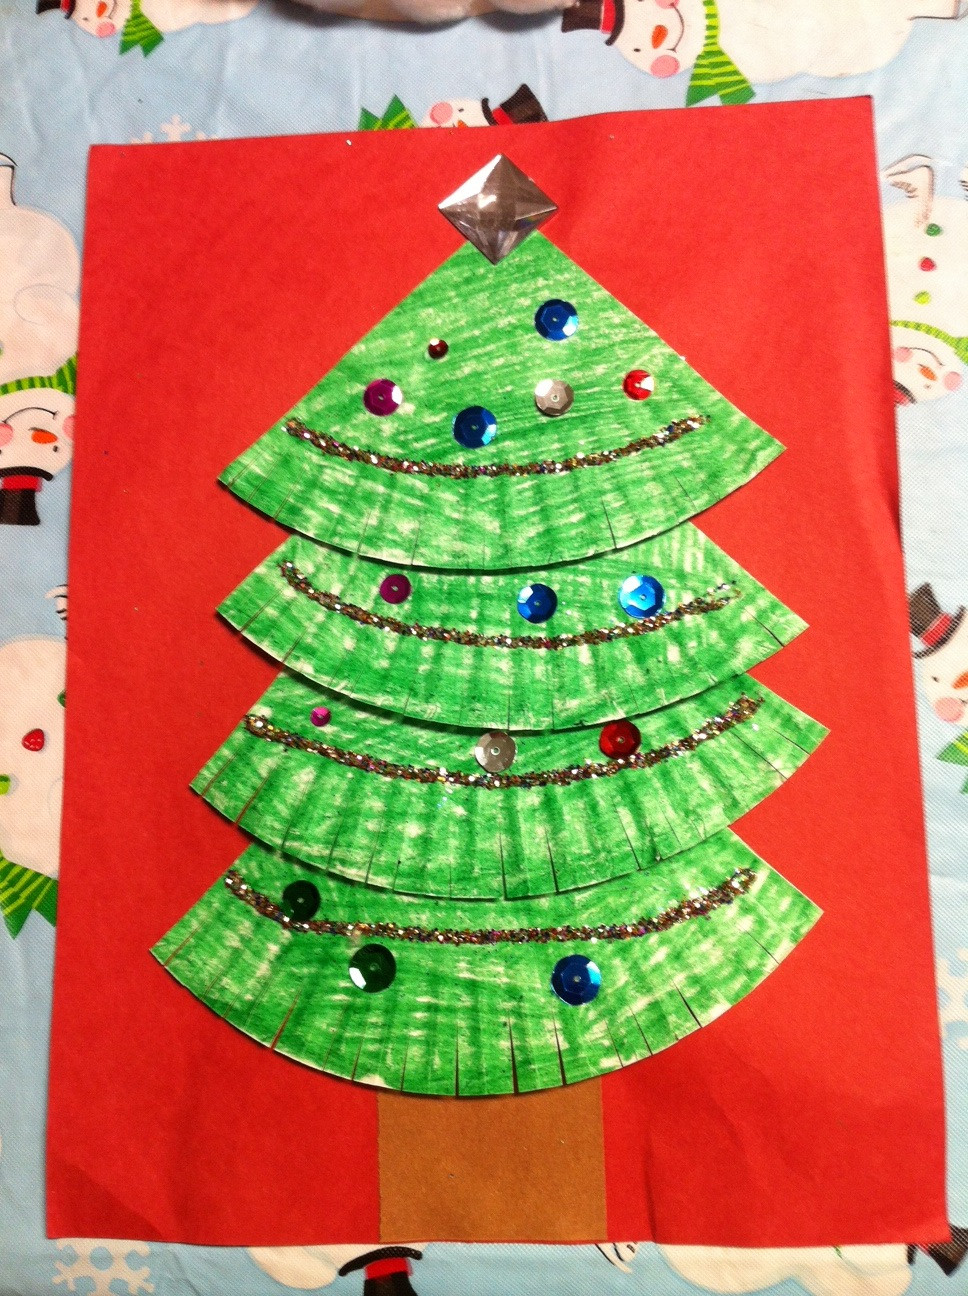 Christmas Art And Craft Ideas For Toddlers
 Kindergarten Kids At Play Fun Winter & Christmas Craftivities